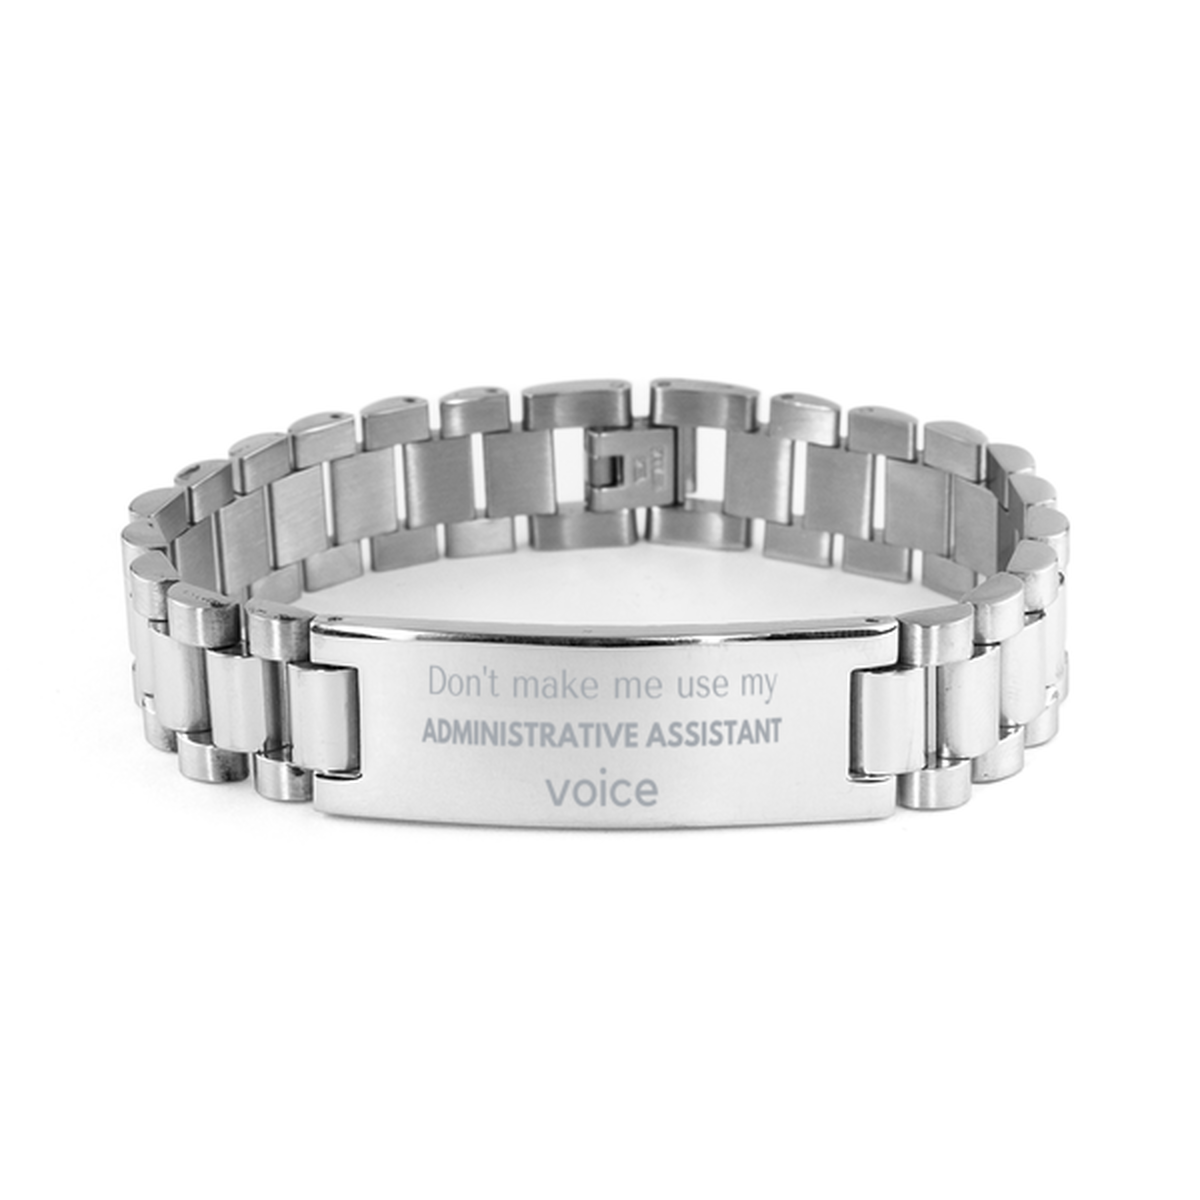 Don't make me use my Administrative Assistant voice, Sarcasm Administrative Assistant Gifts, Christmas Administrative Assistant Ladder Stainless Steel Bracelet Birthday Unique Gifts For Administrative Assistant Coworkers, Men, Women, Colleague, Friends